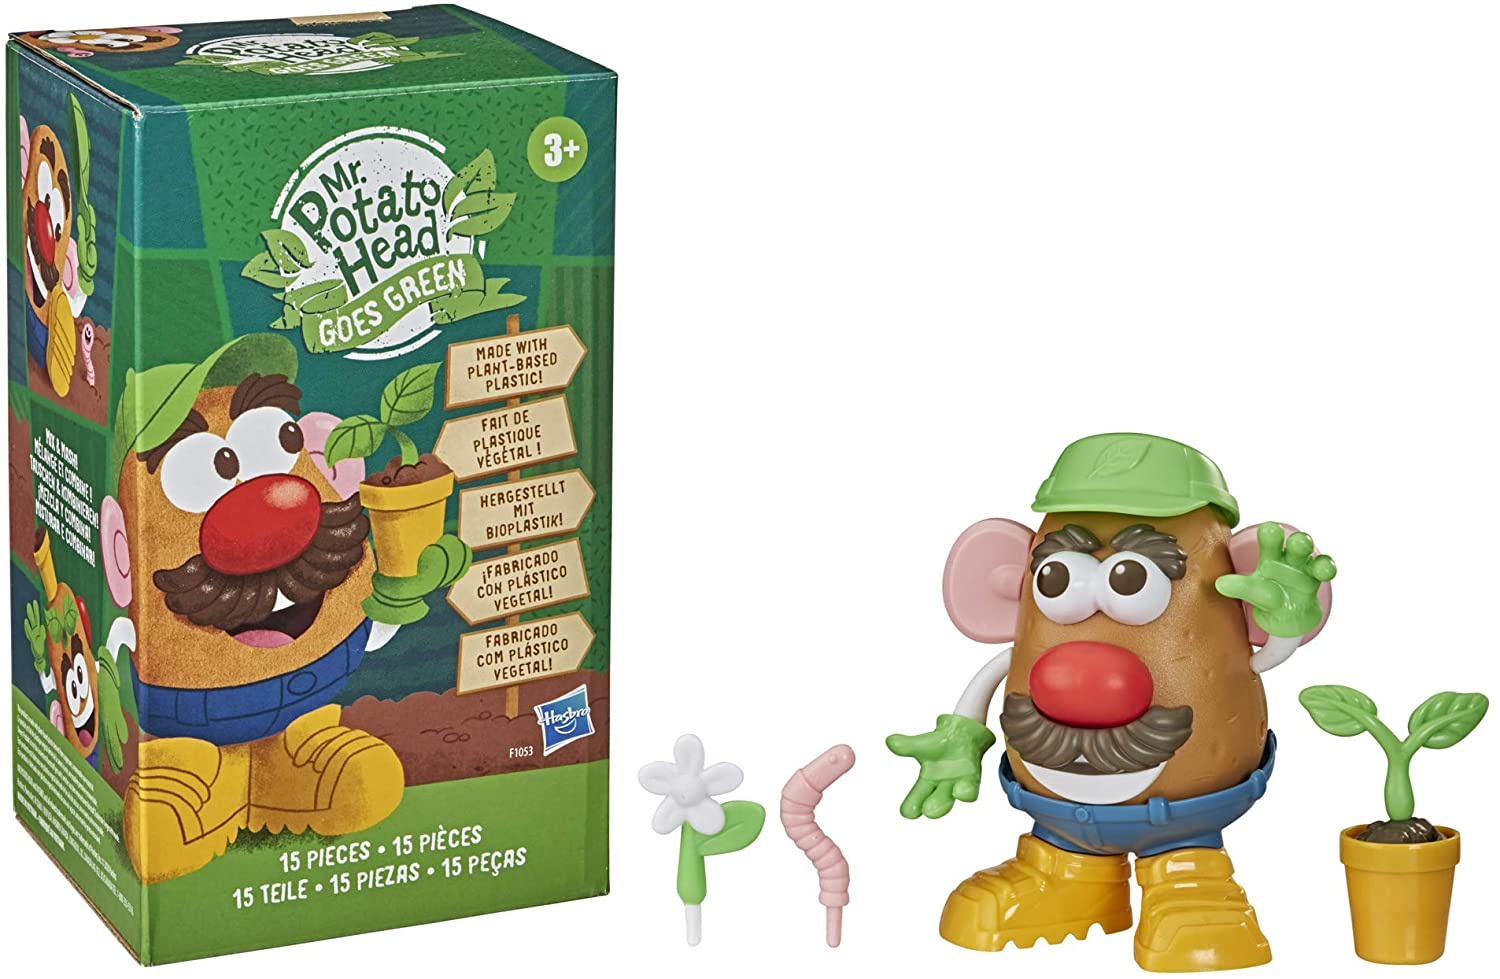 Mr Potato Head Goes Green Toy for Kids Ages 3 and up, Made with Plant-Based Plastic and FSC-Certified Paper Packaging - image 1 of 7